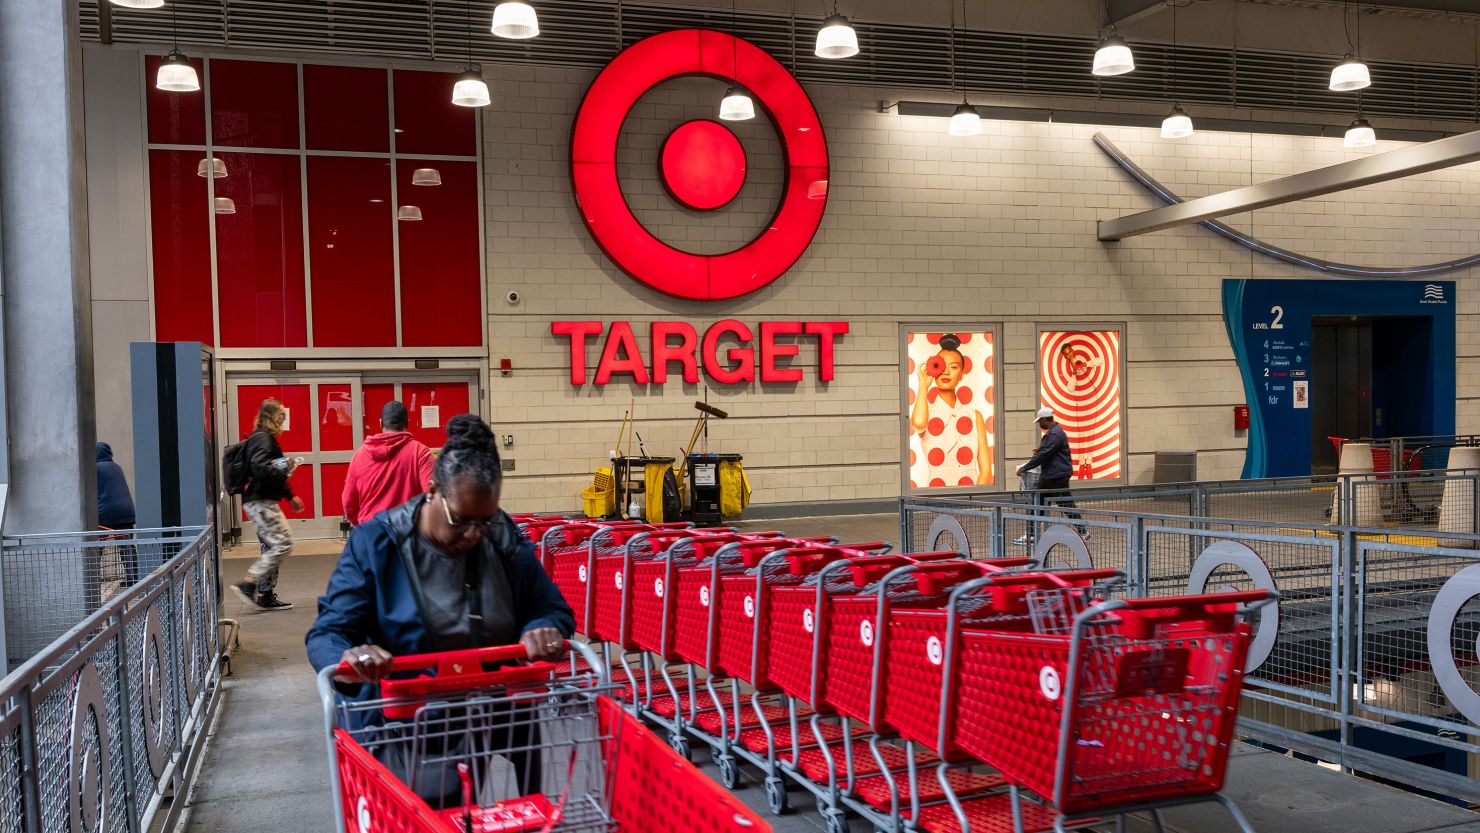 Target Is Reducing Prices on a Wide Range of Essential Items in Response to Rising Inflation